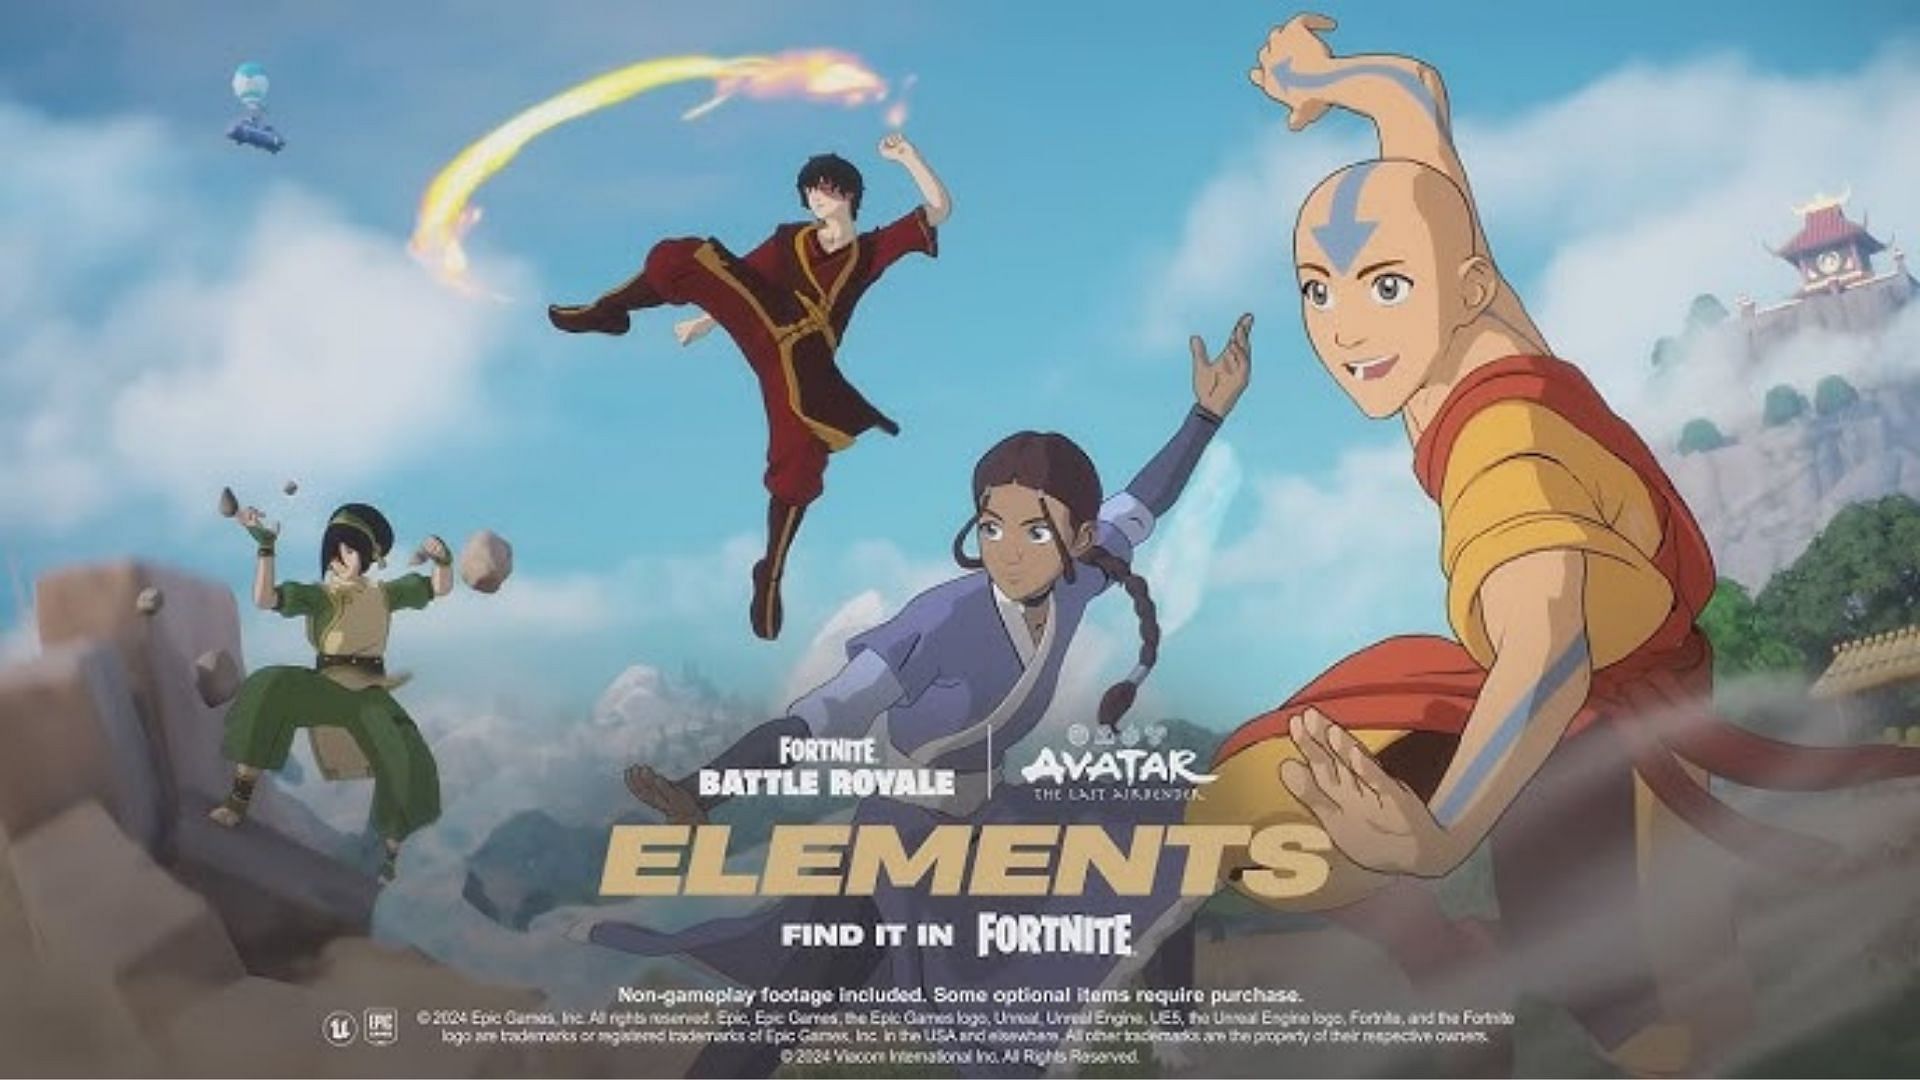 When does Fortnite x Avatar The Last Airbender collaboration end?